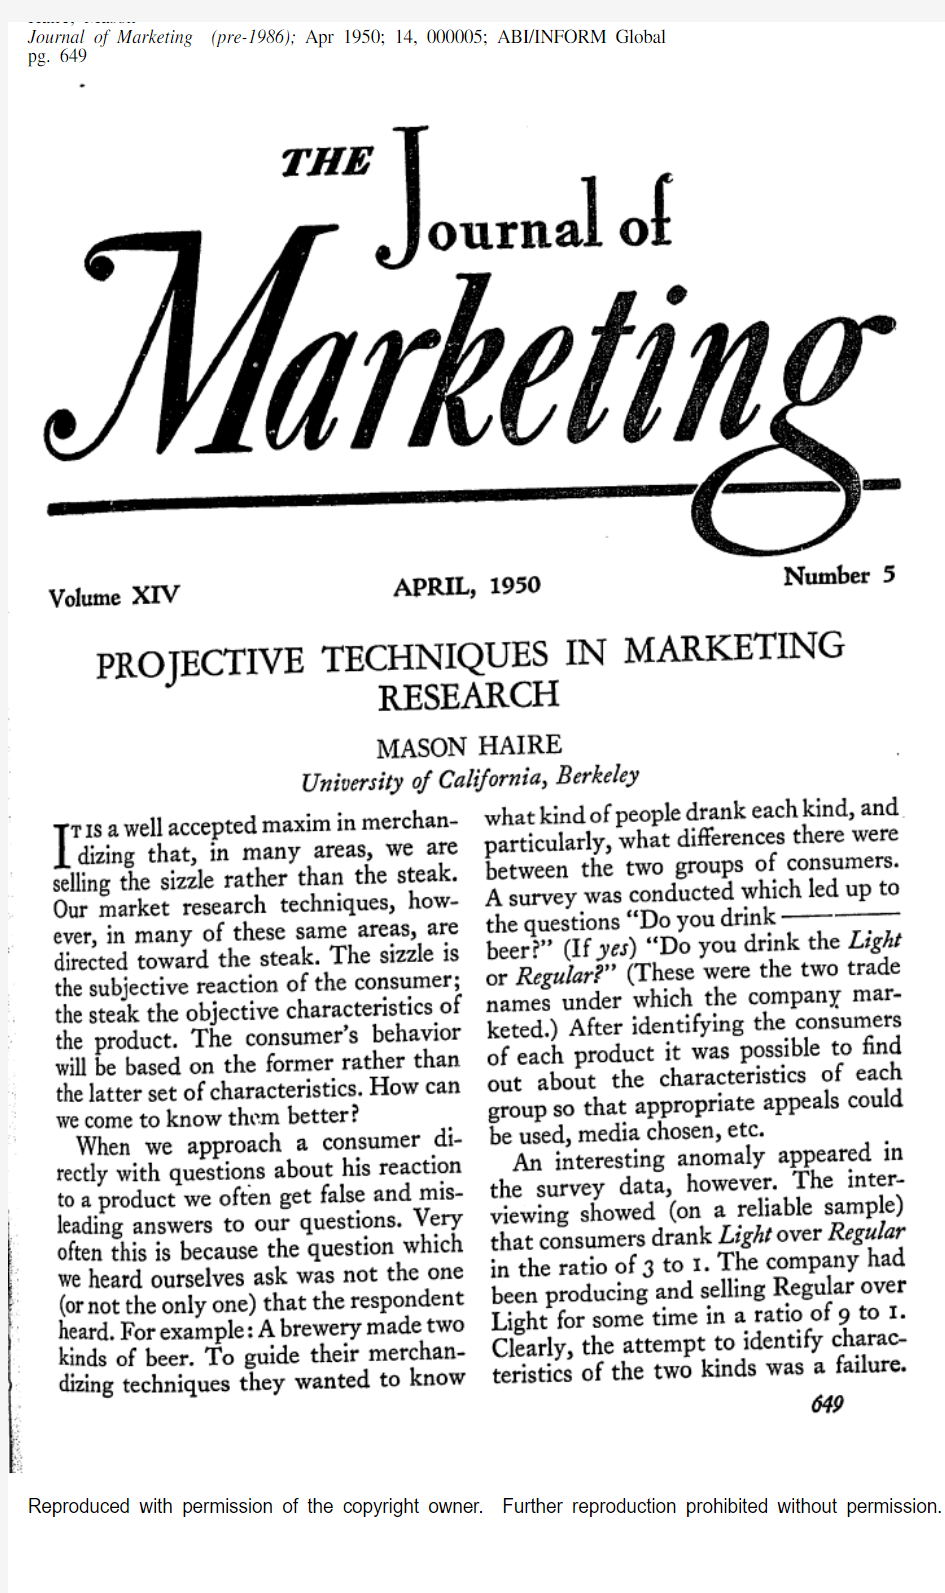 Projective Techniques in Marketing Research